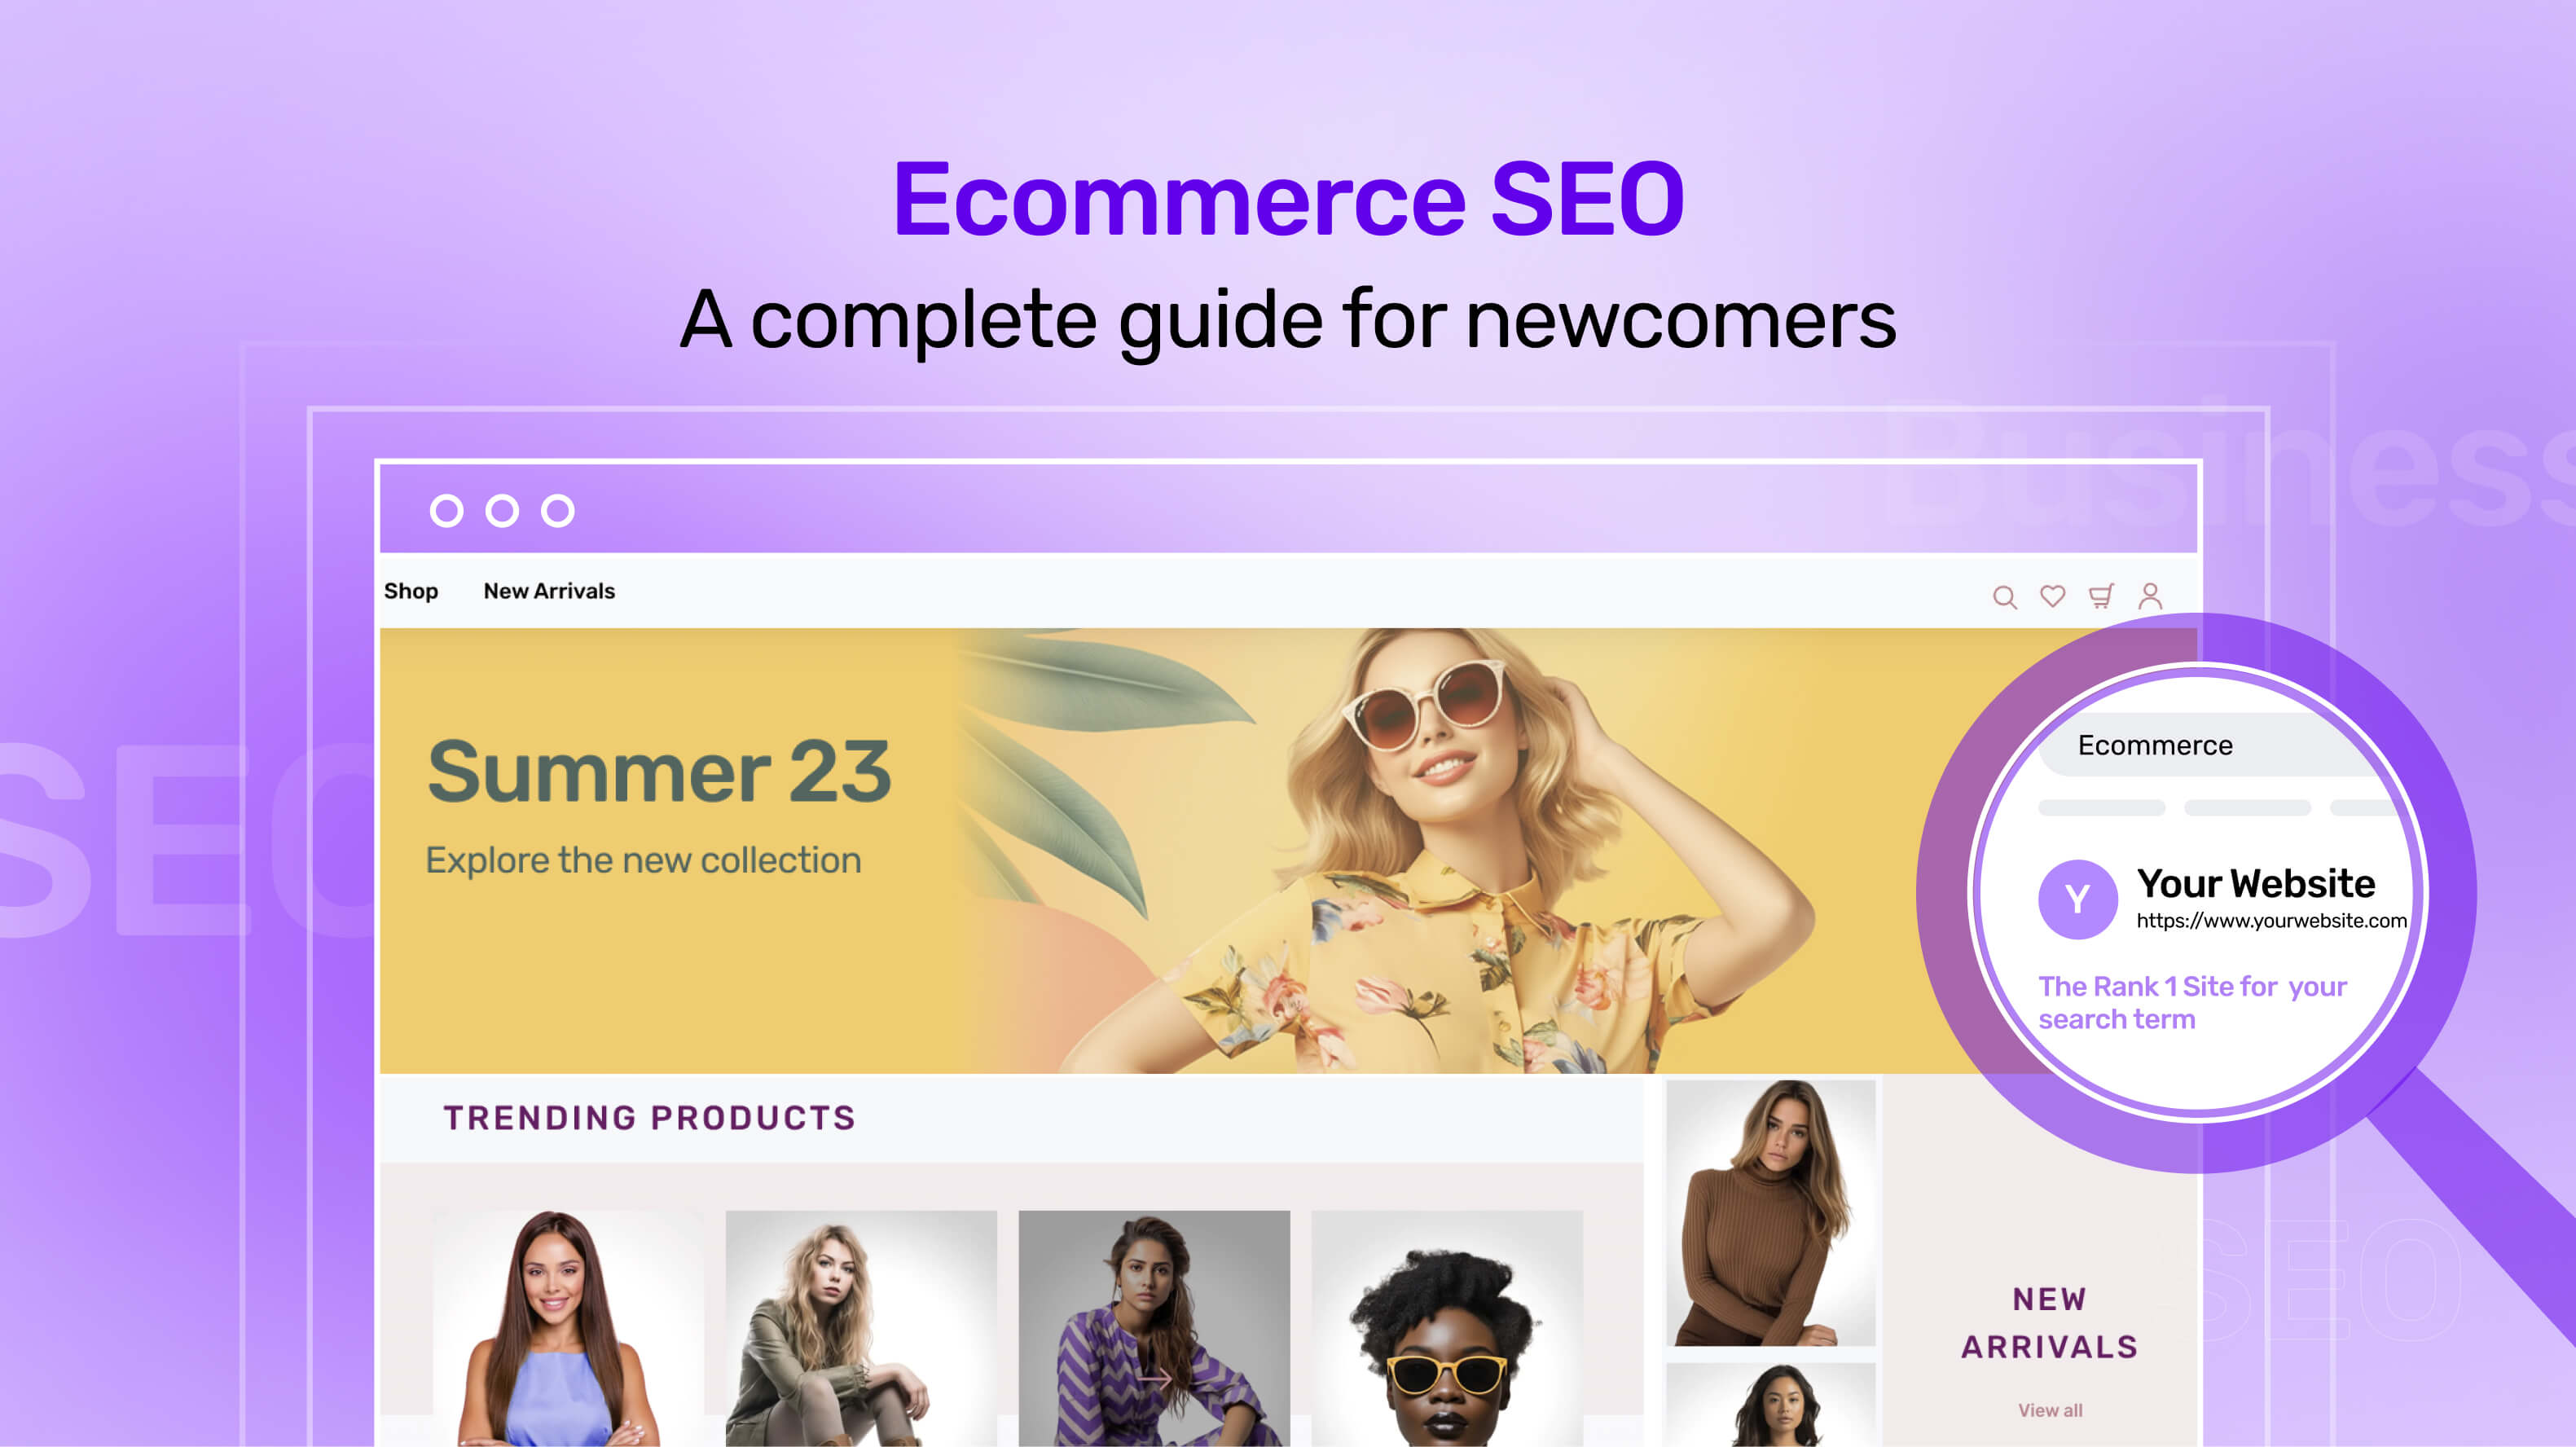 Ecommerce SEO: a complete guide for newcomers